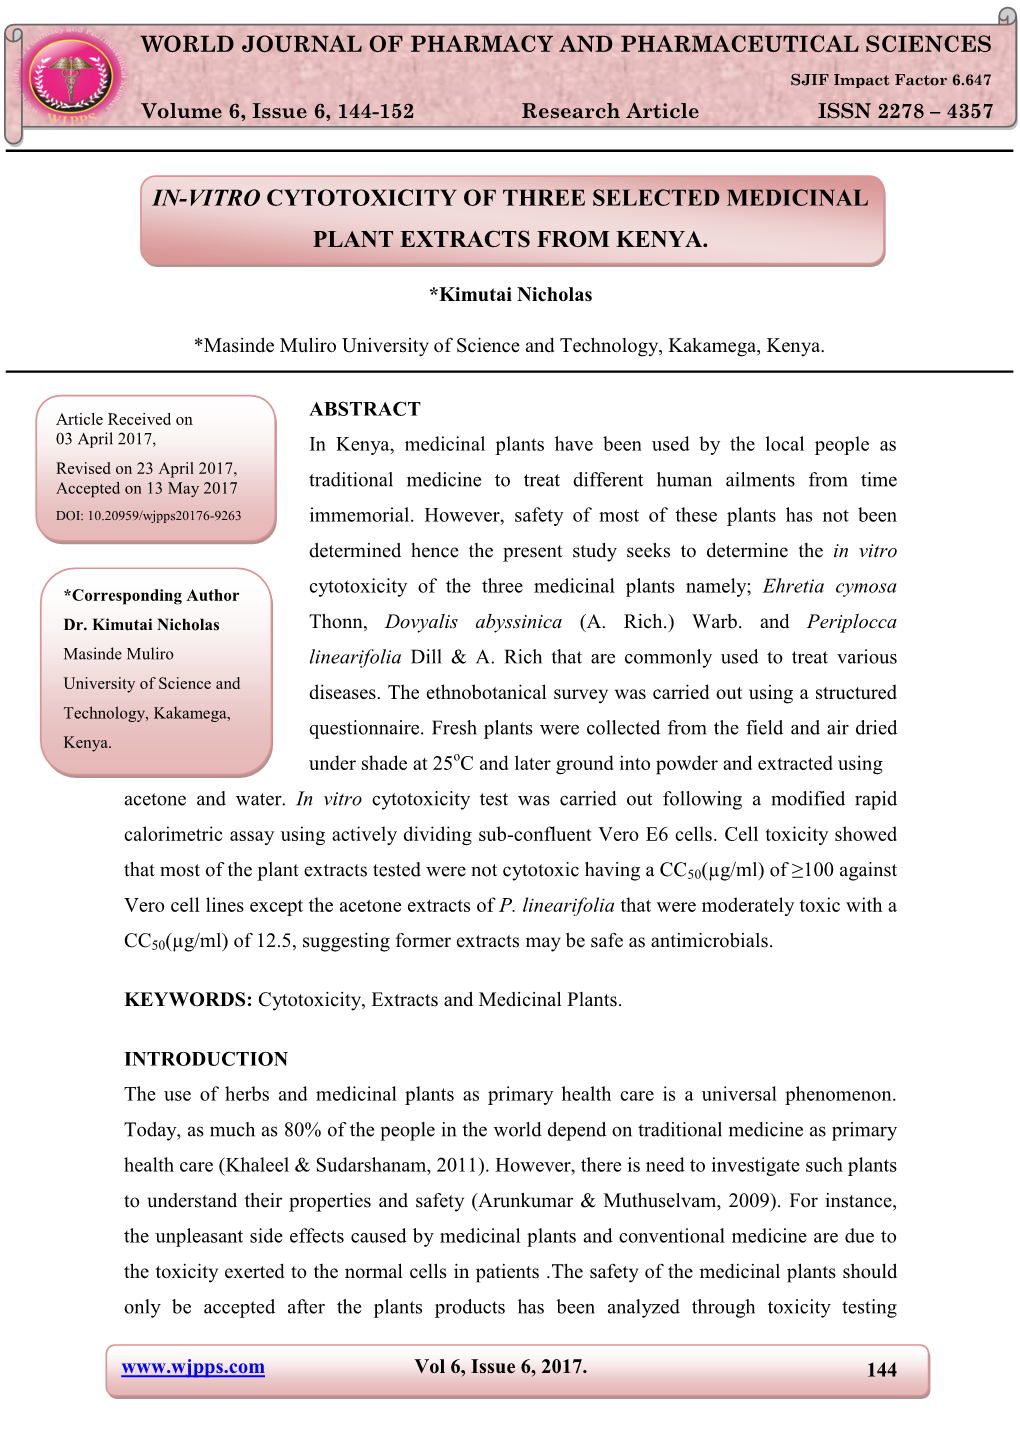 In-Vitro Cytotoxicity of Three Selected Medicinal Plant Extracts from Kenya